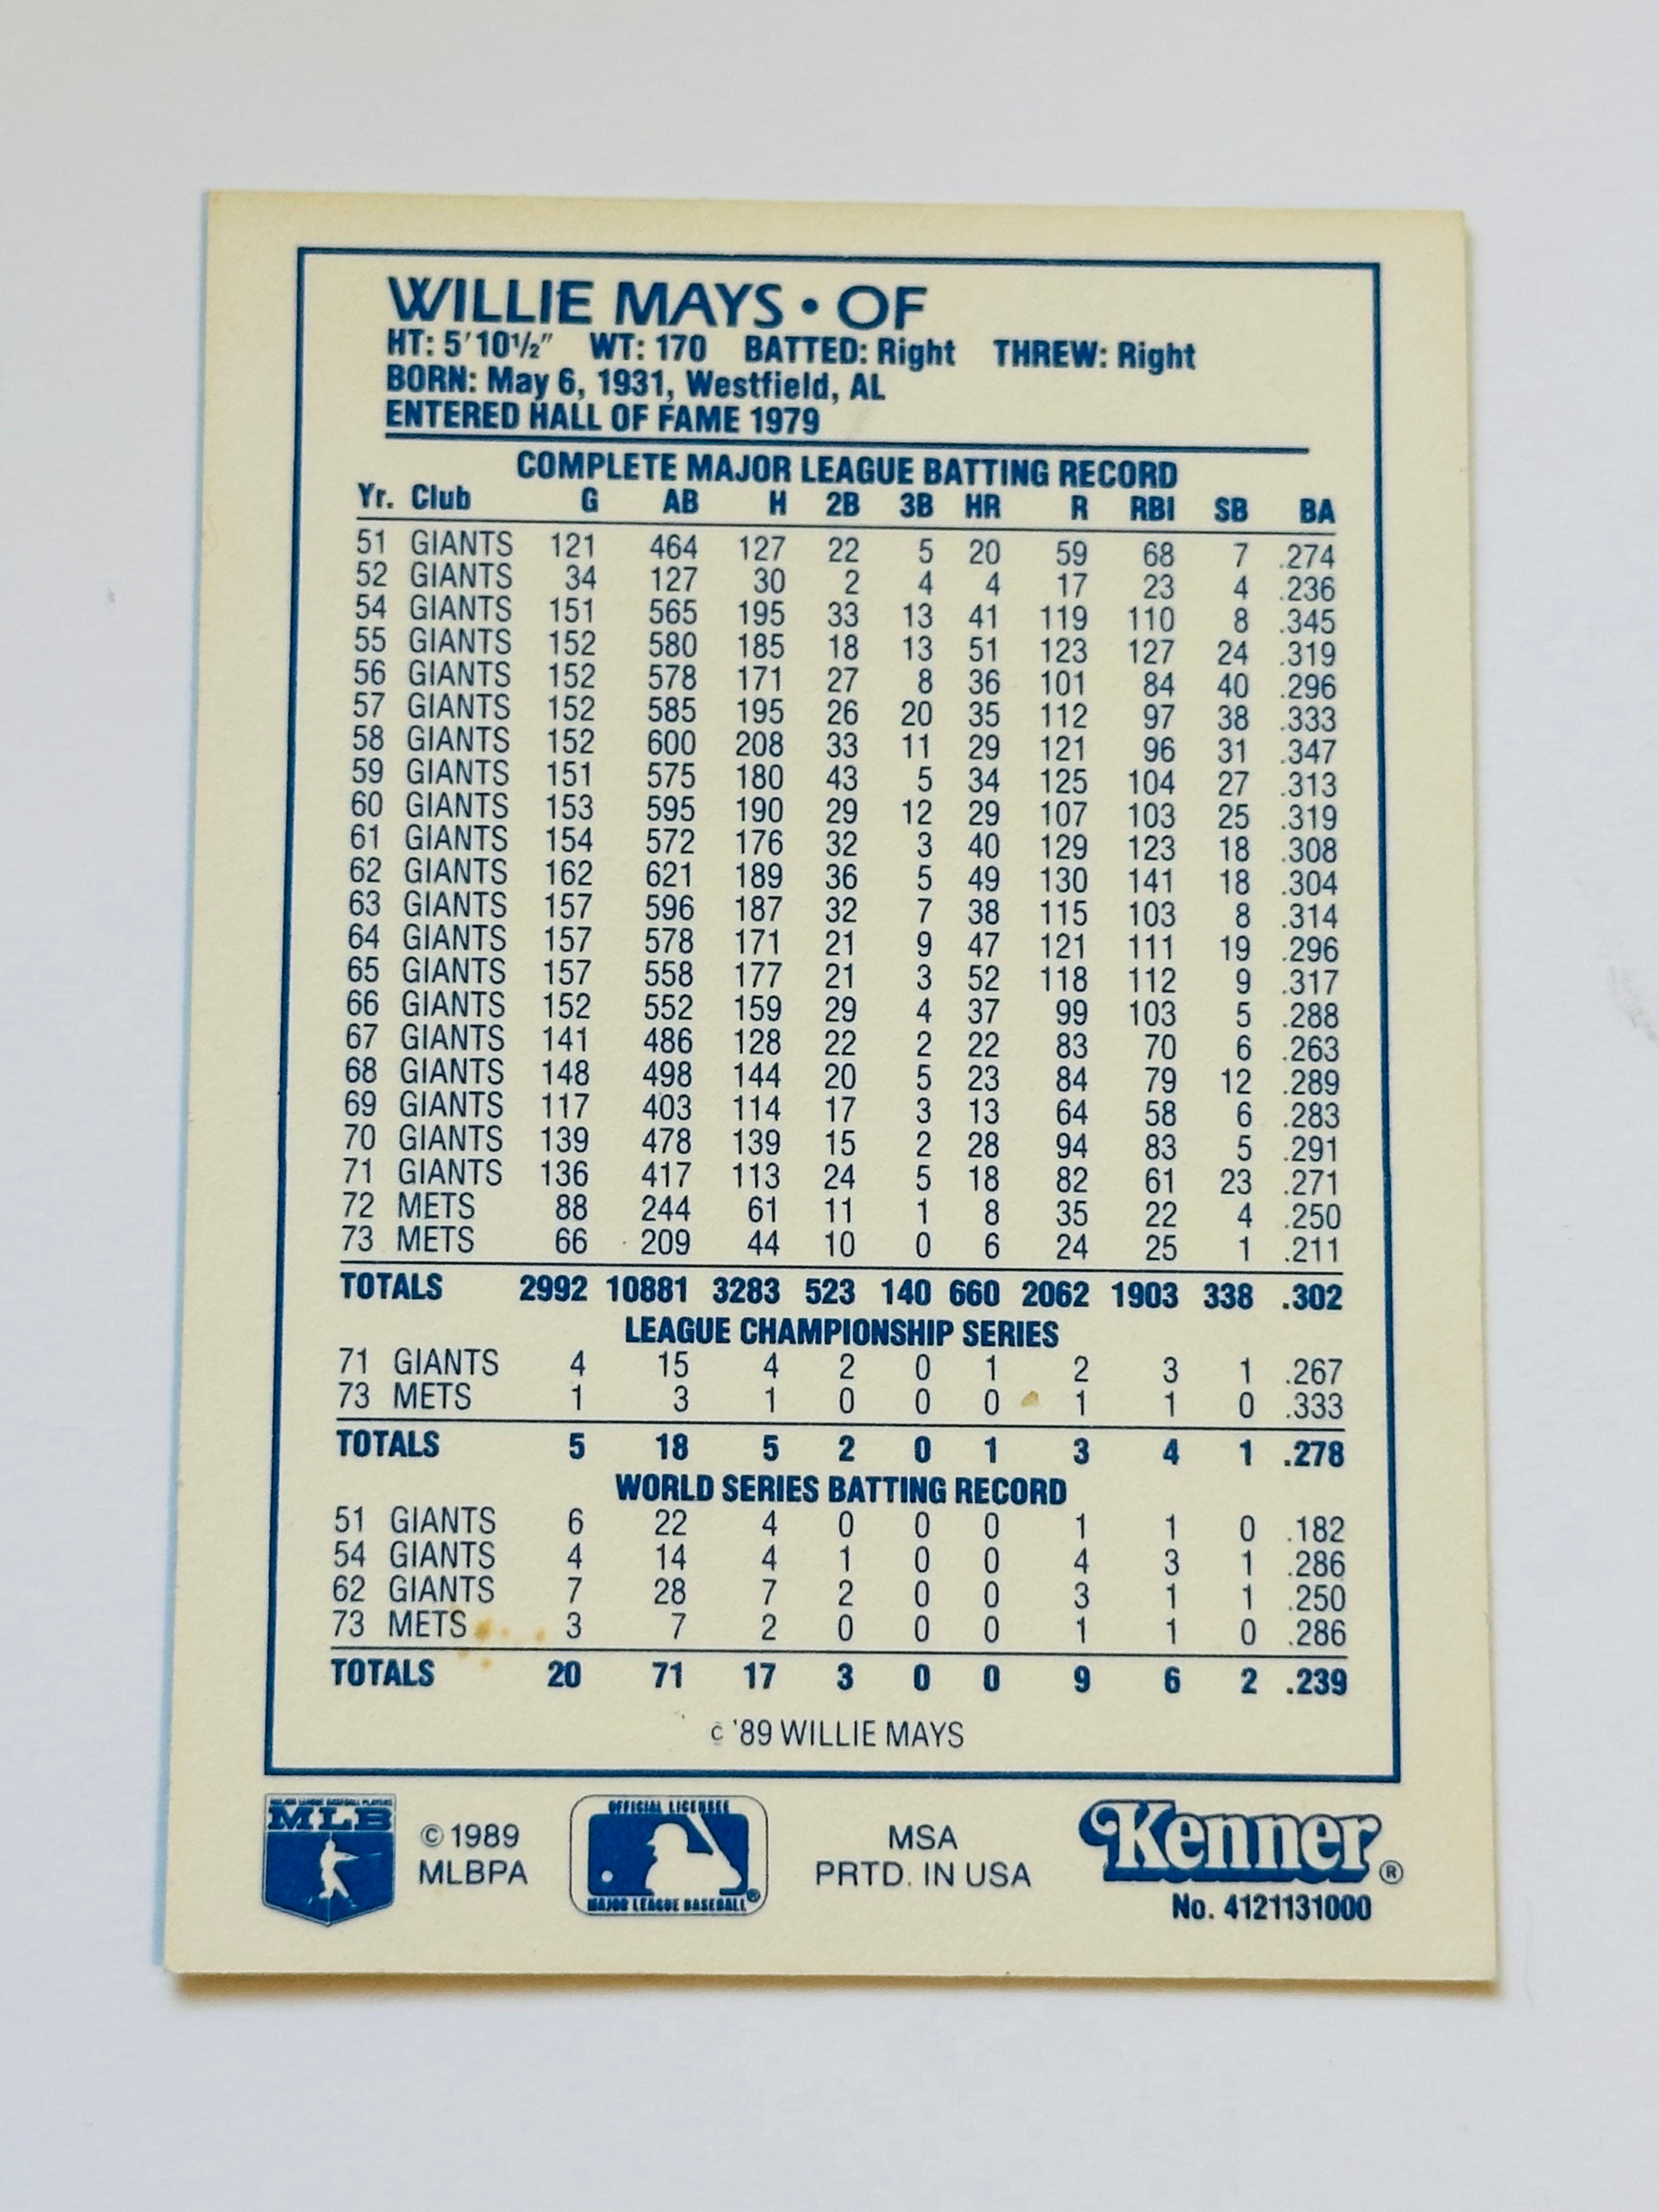 Willie Mays Kenner starting lineup rare insert card 1989